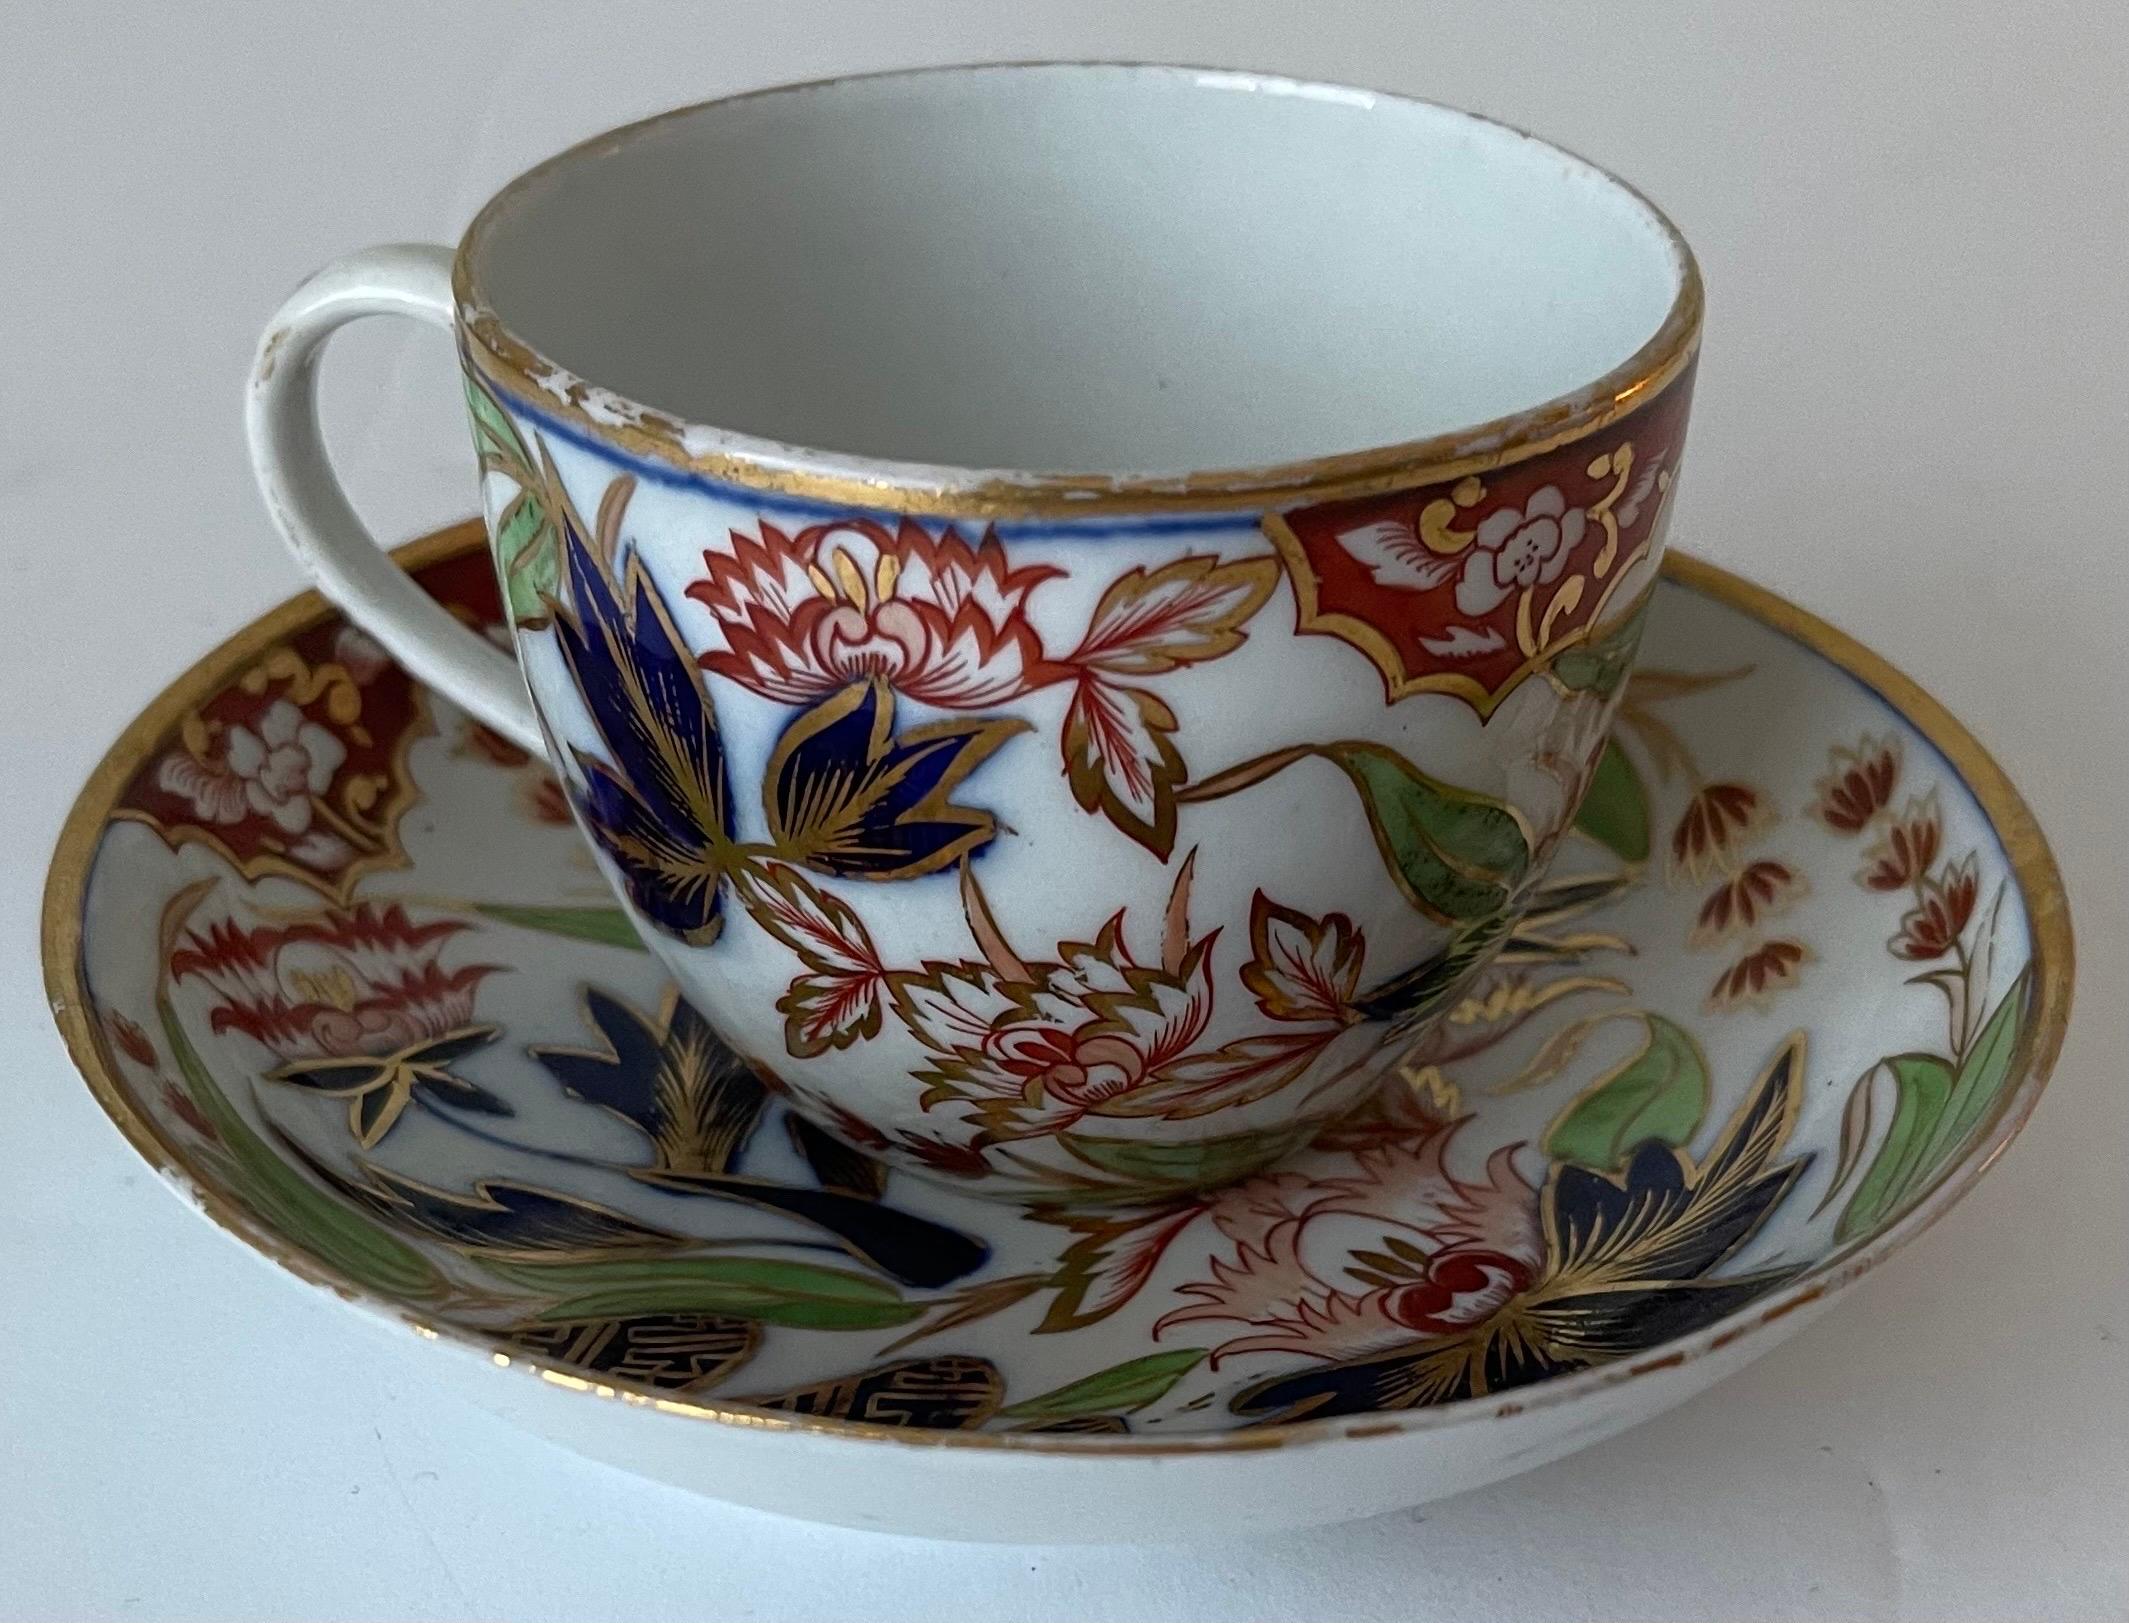 Coalport John Rose Thumb and Finger Pattern Teacup & Saucer In Good Condition For Sale In Stamford, CT